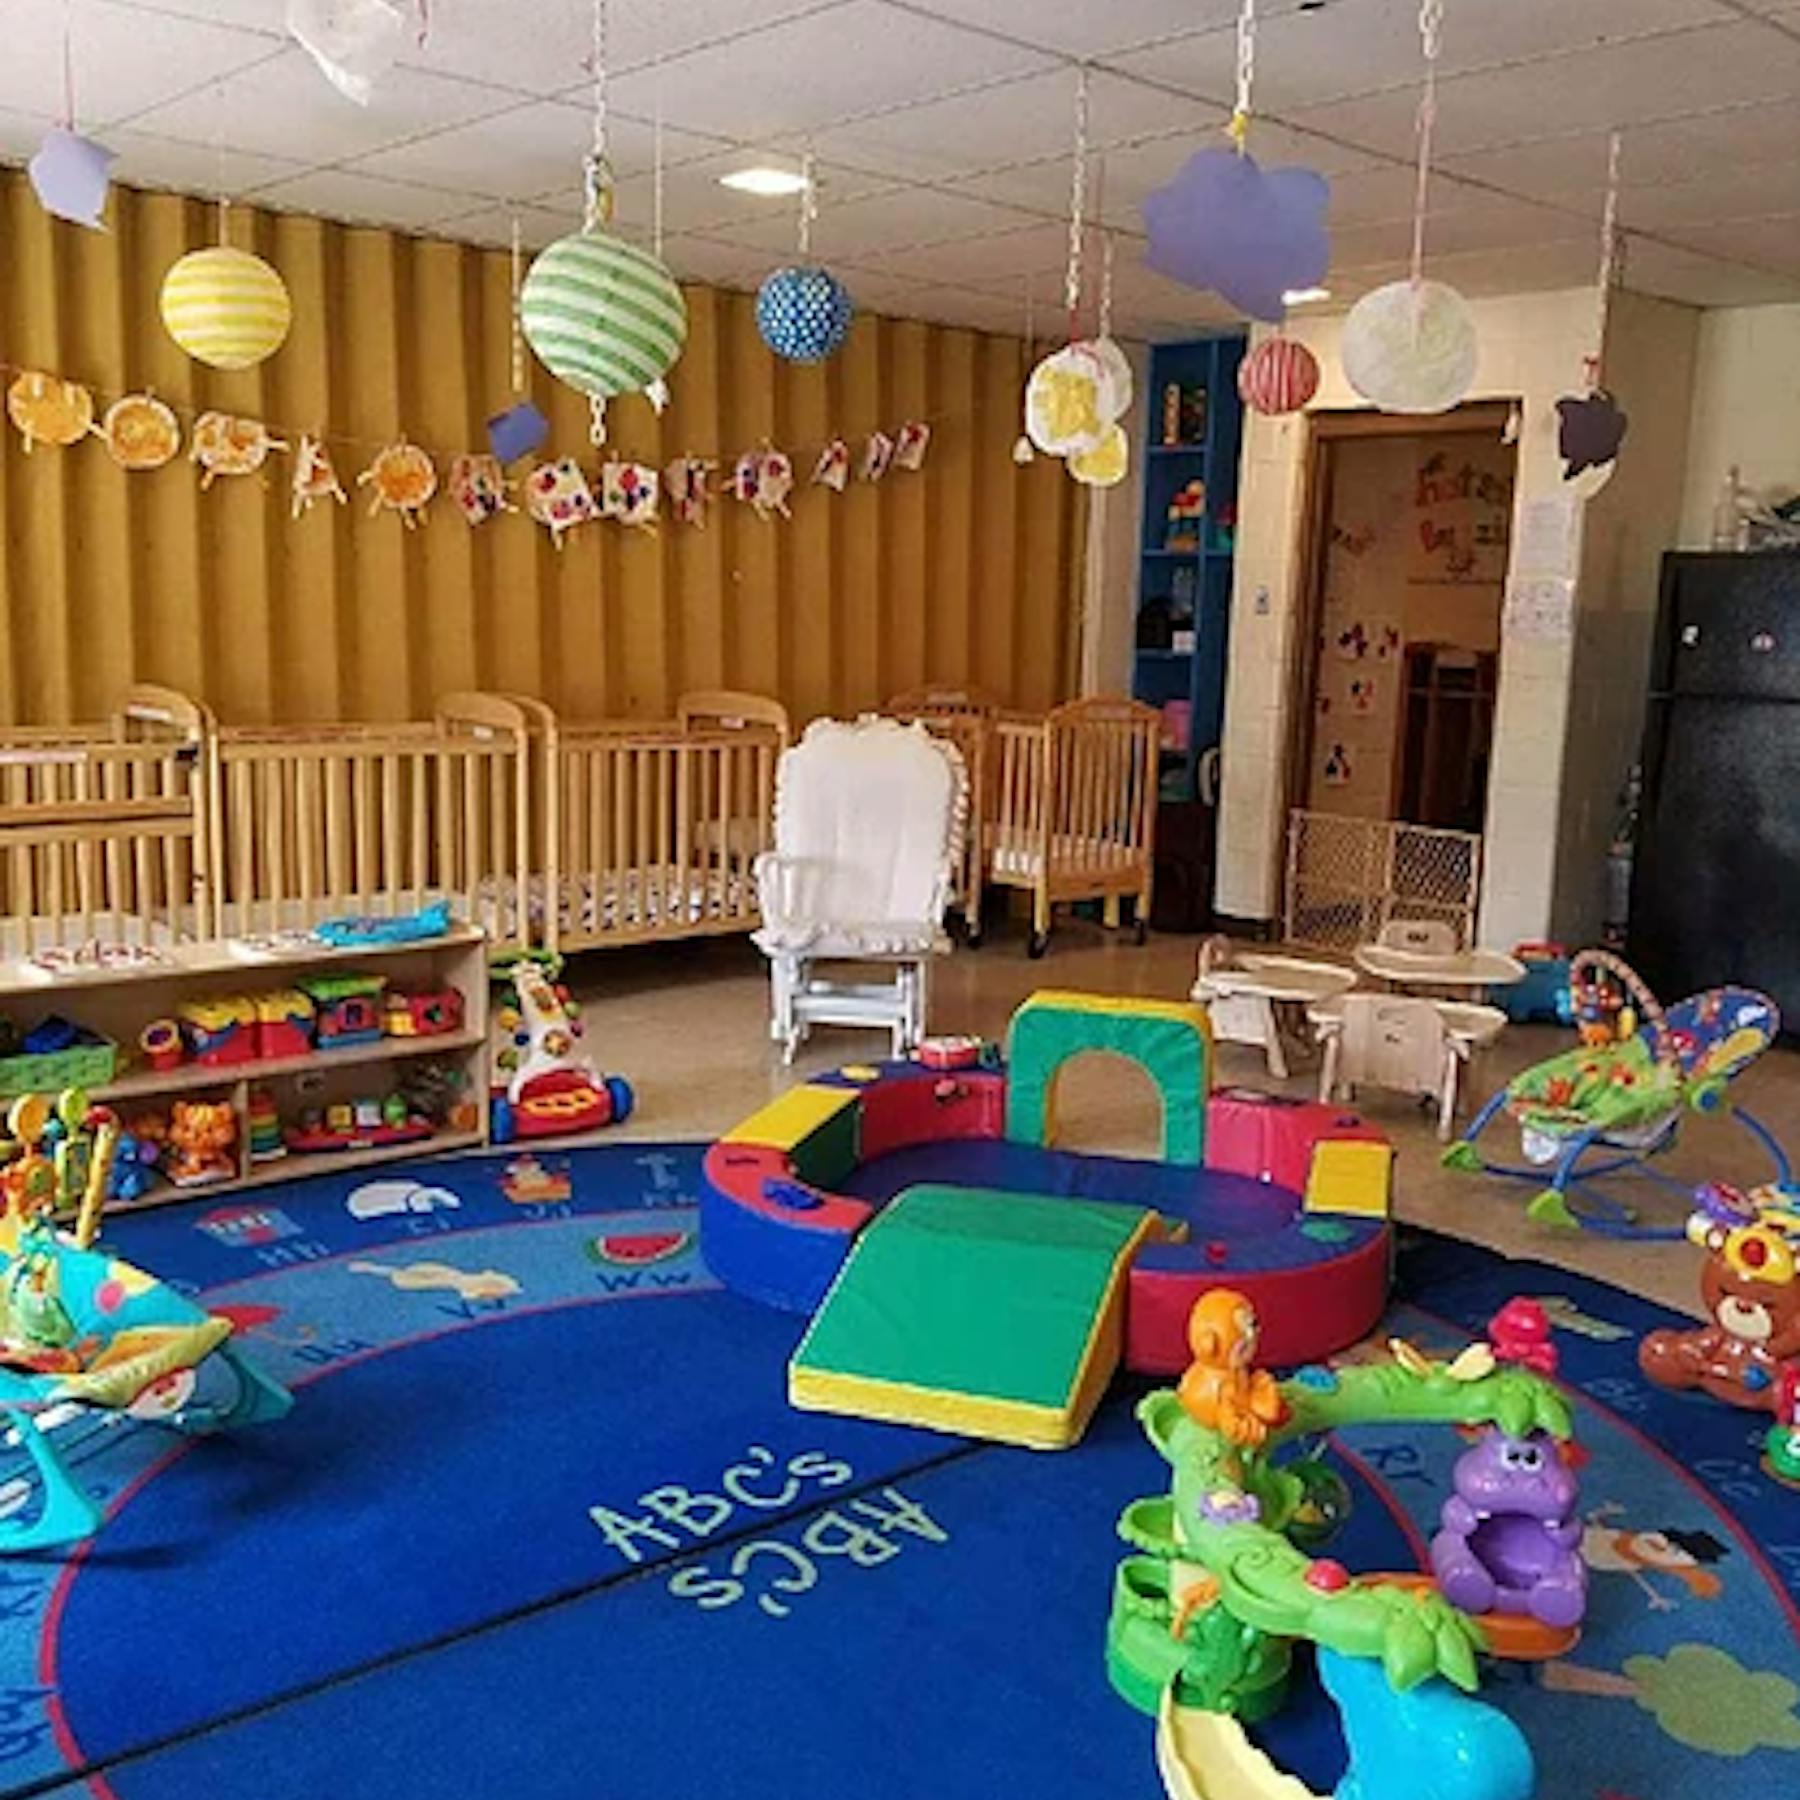 Honeyland Child Care Center - Daycare in Willow Grove, PA ...